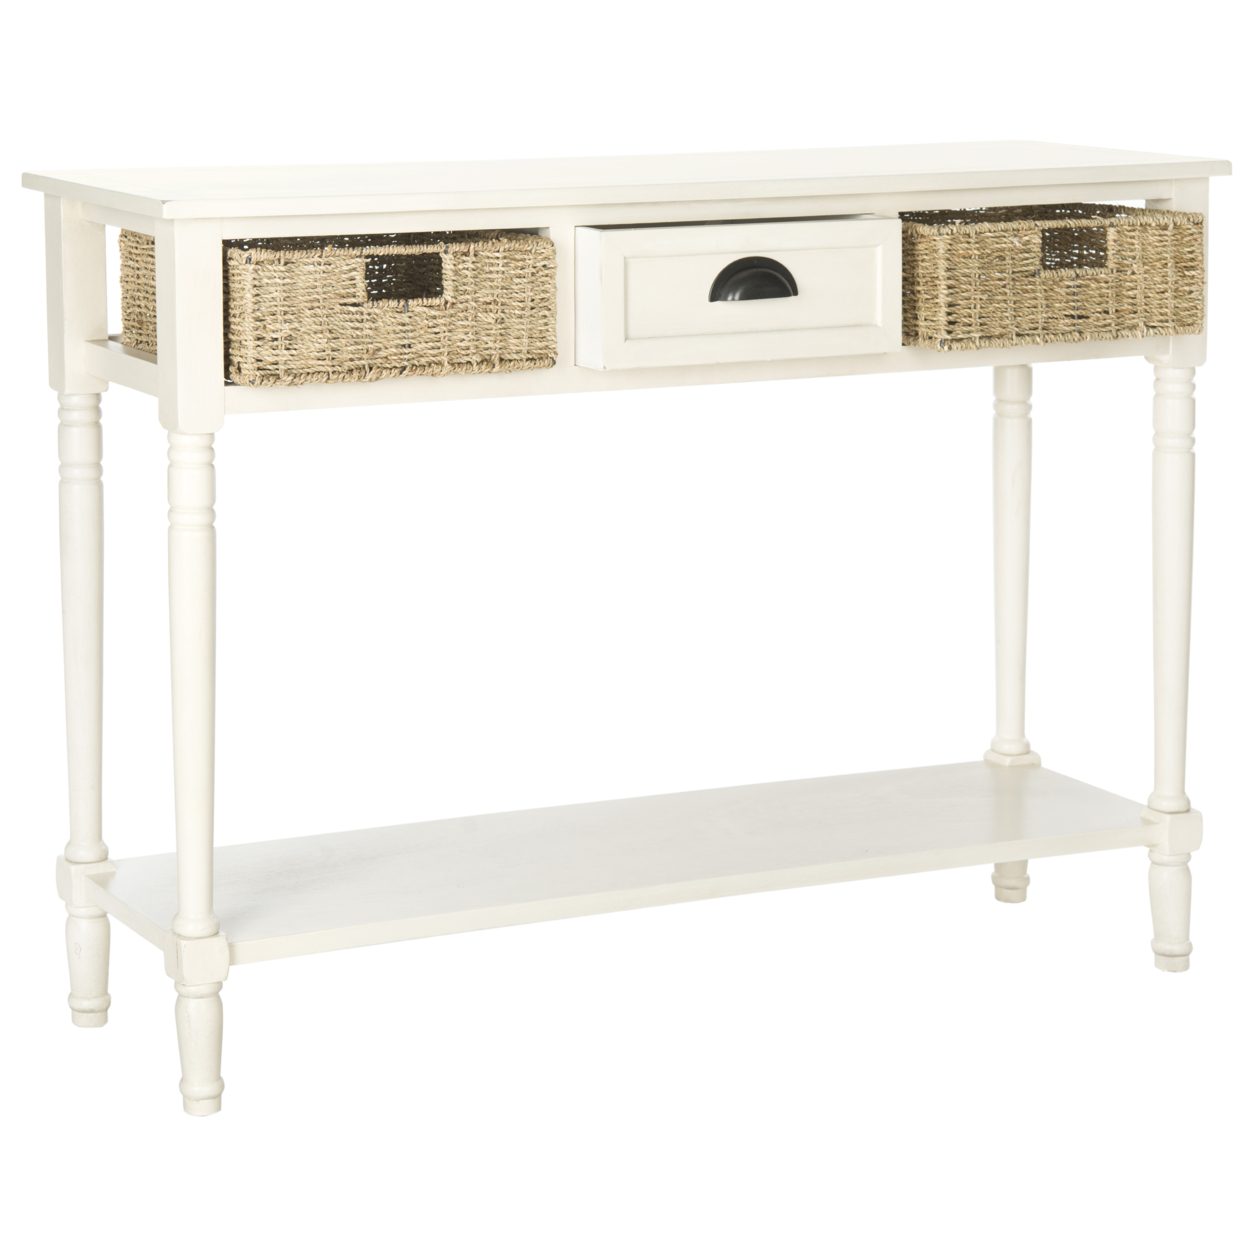 SAFAVIEH Winifred Wicker Console Table With Storage White